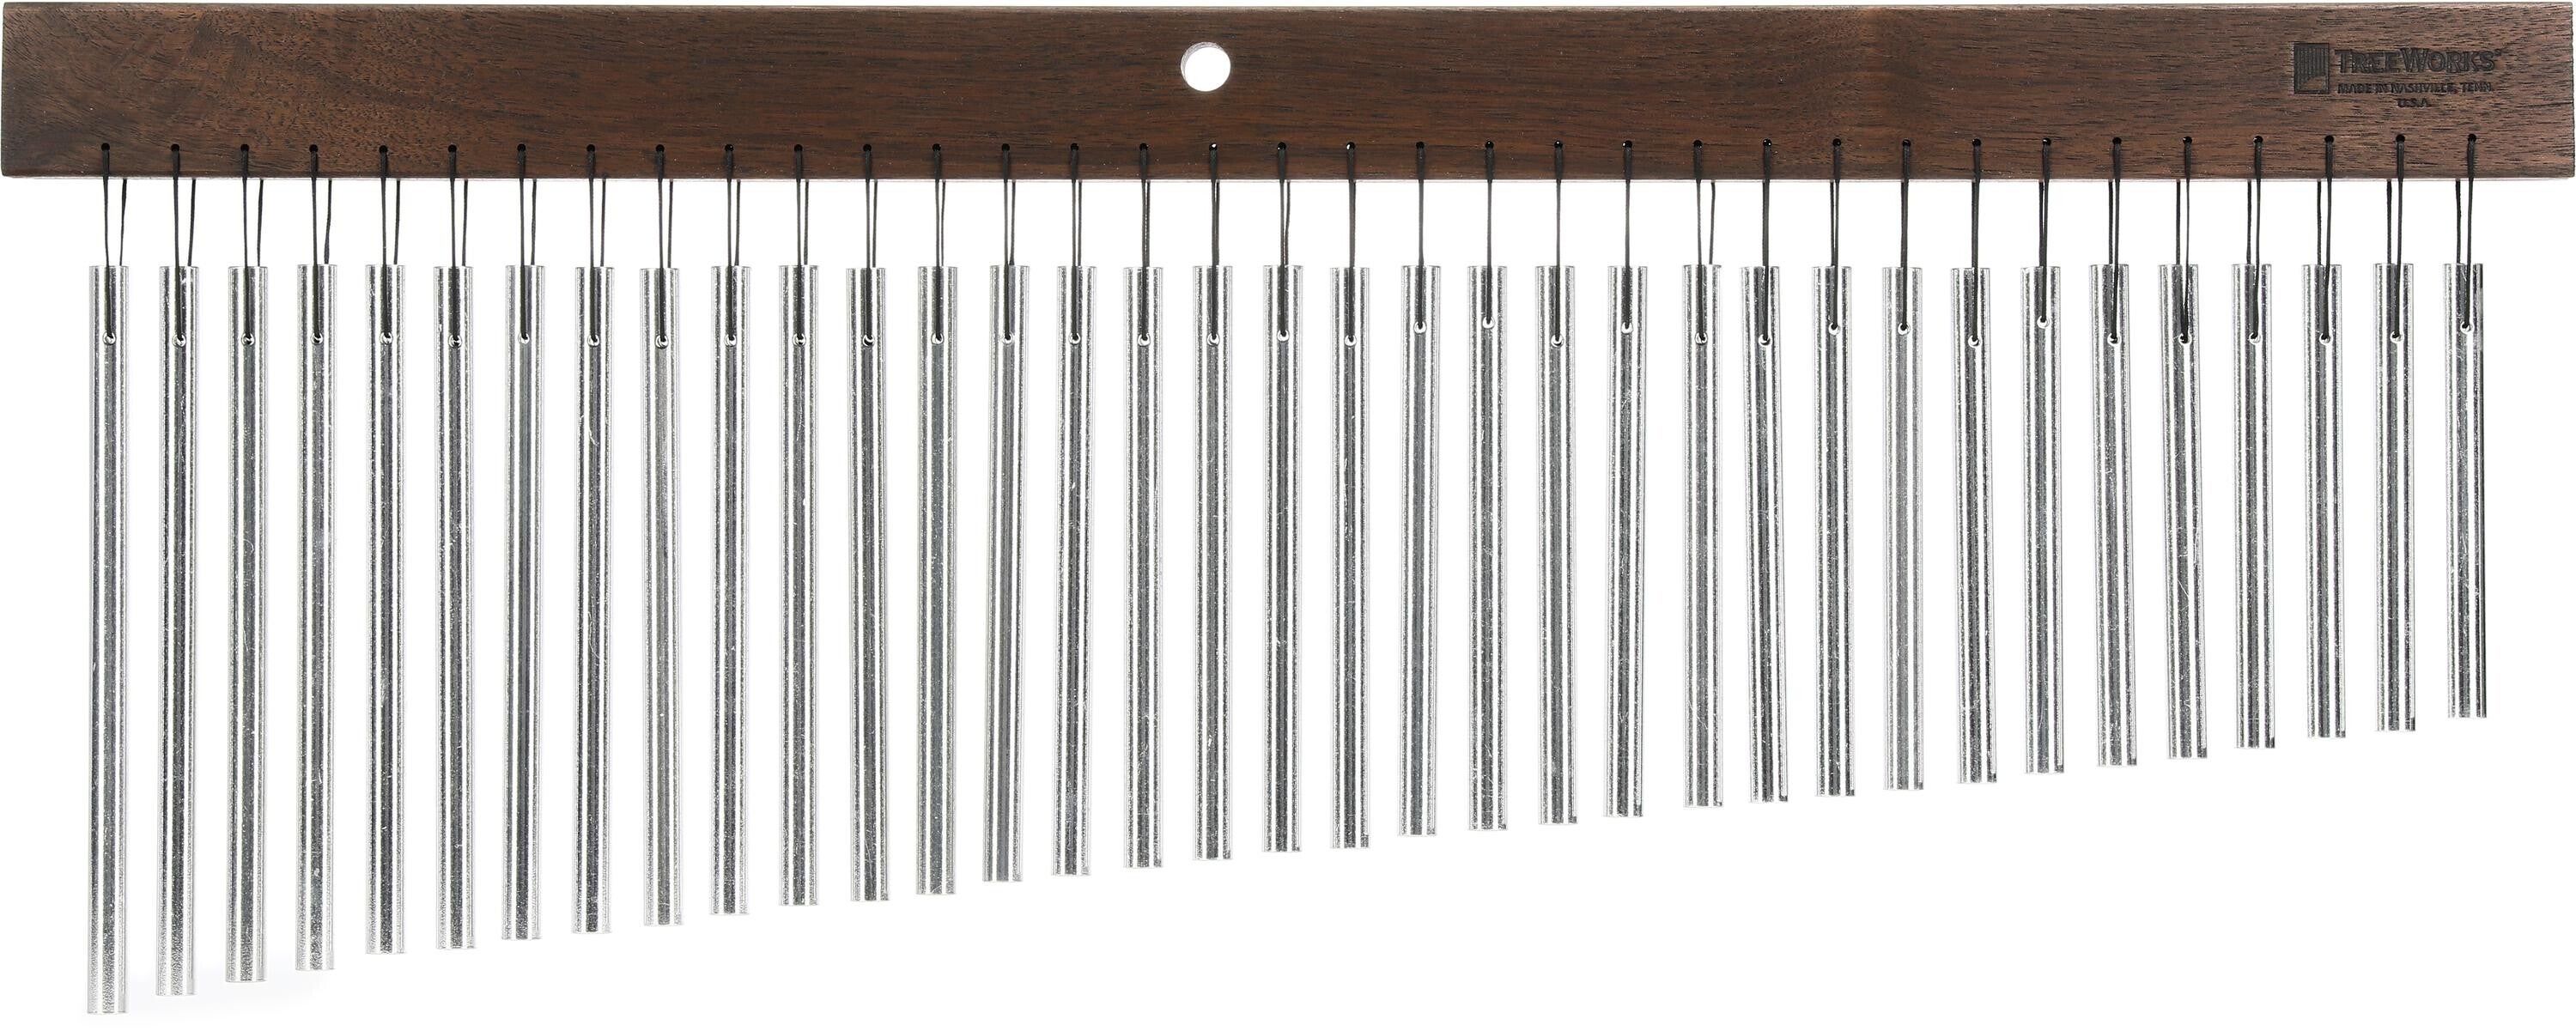 Treeworks Tre35 - 35-bar Single-row Classic Chime | Sweetwater